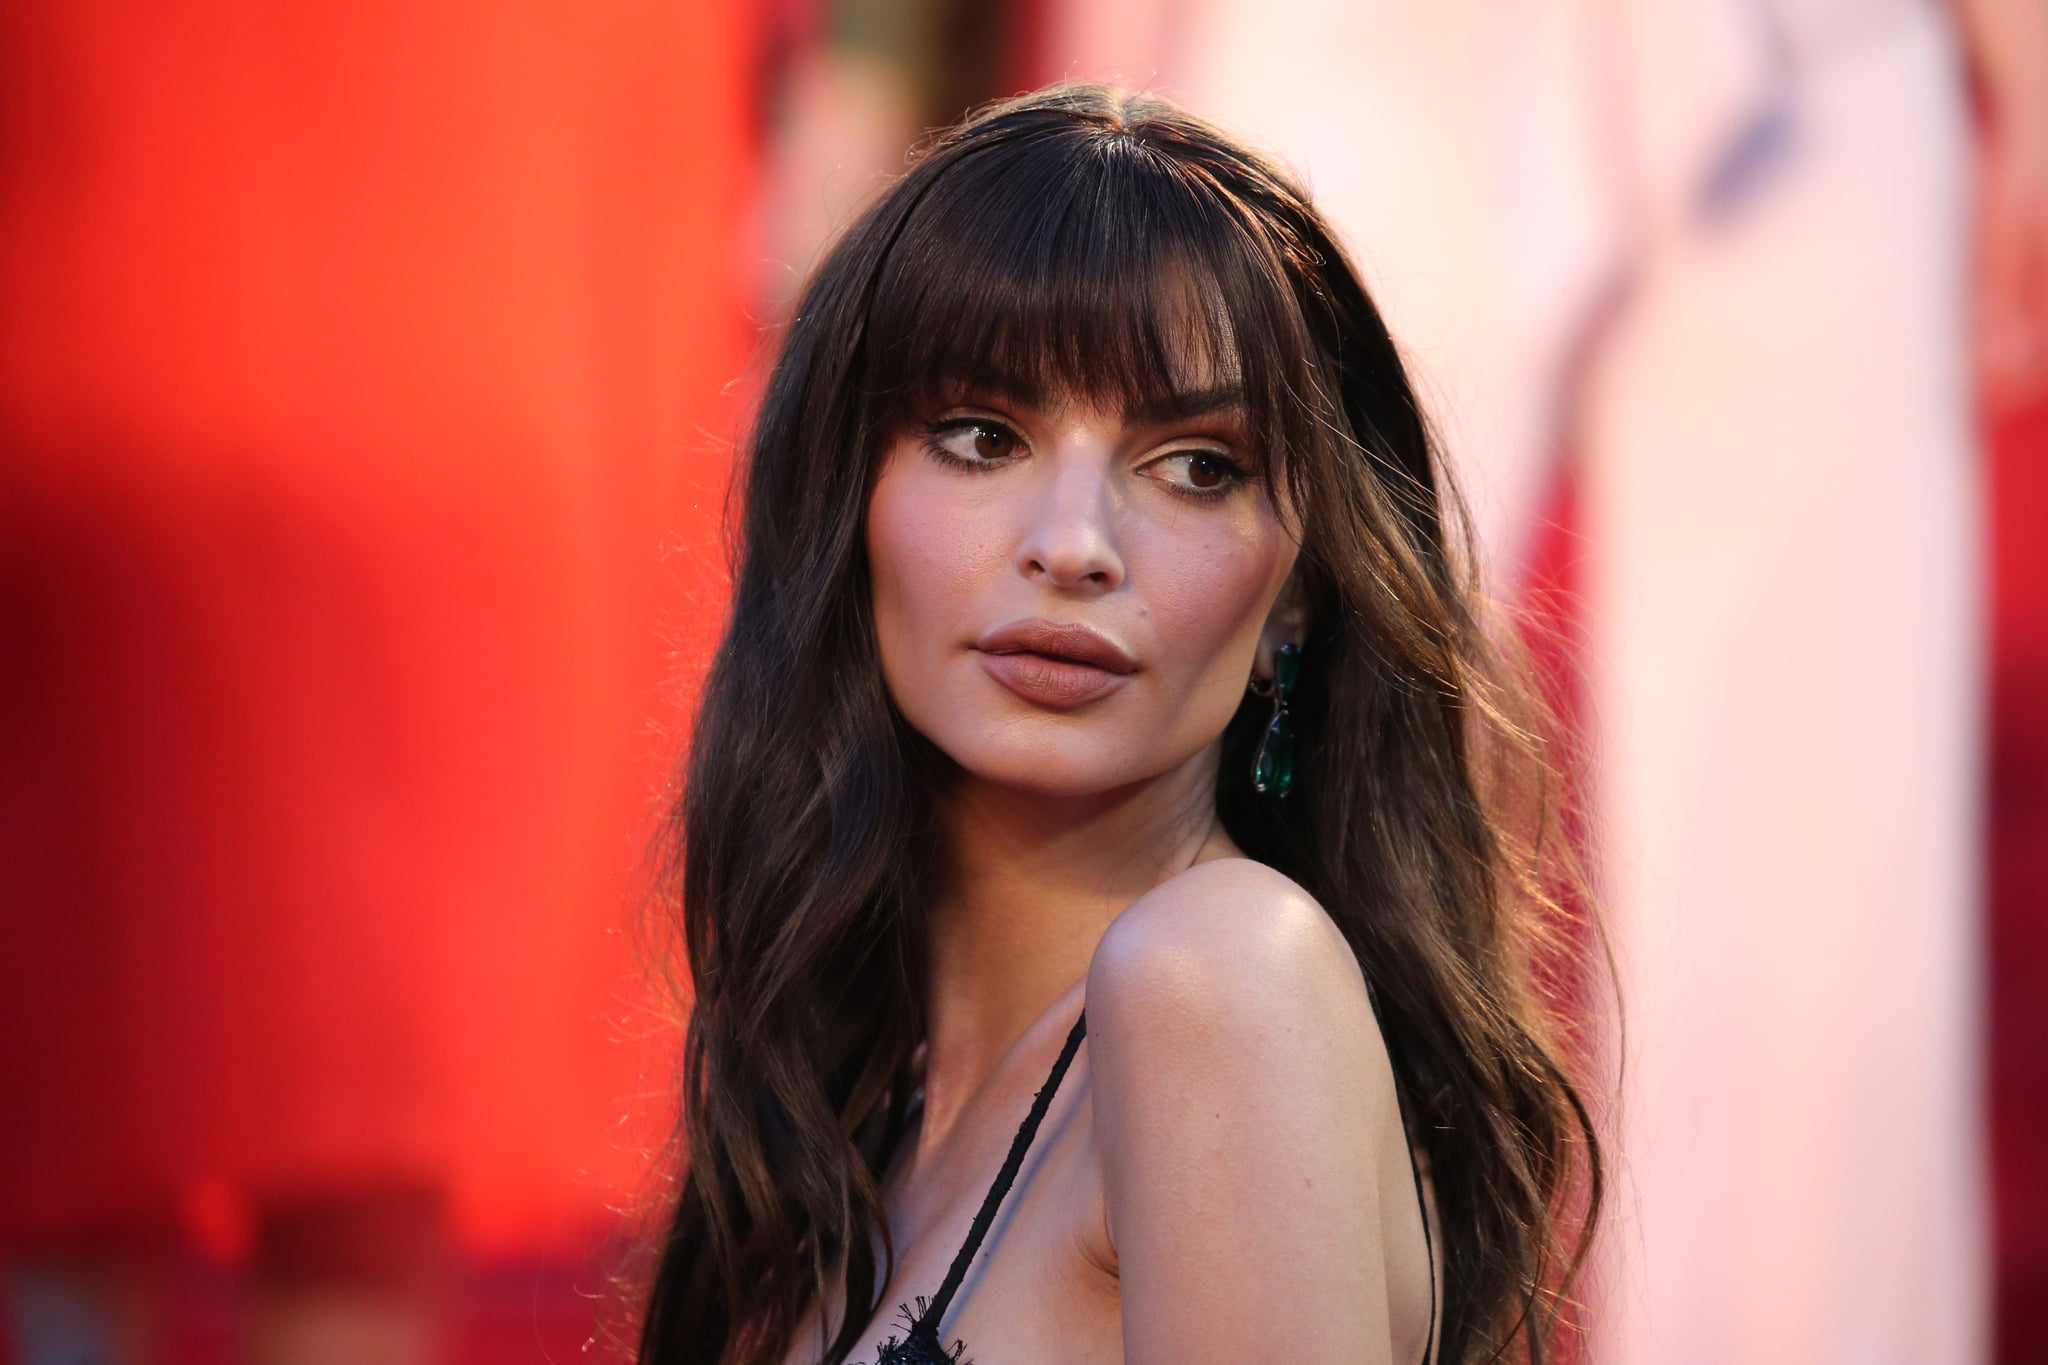 Cannes, France - May 23: Emily Ratajkowski attends the film screening 